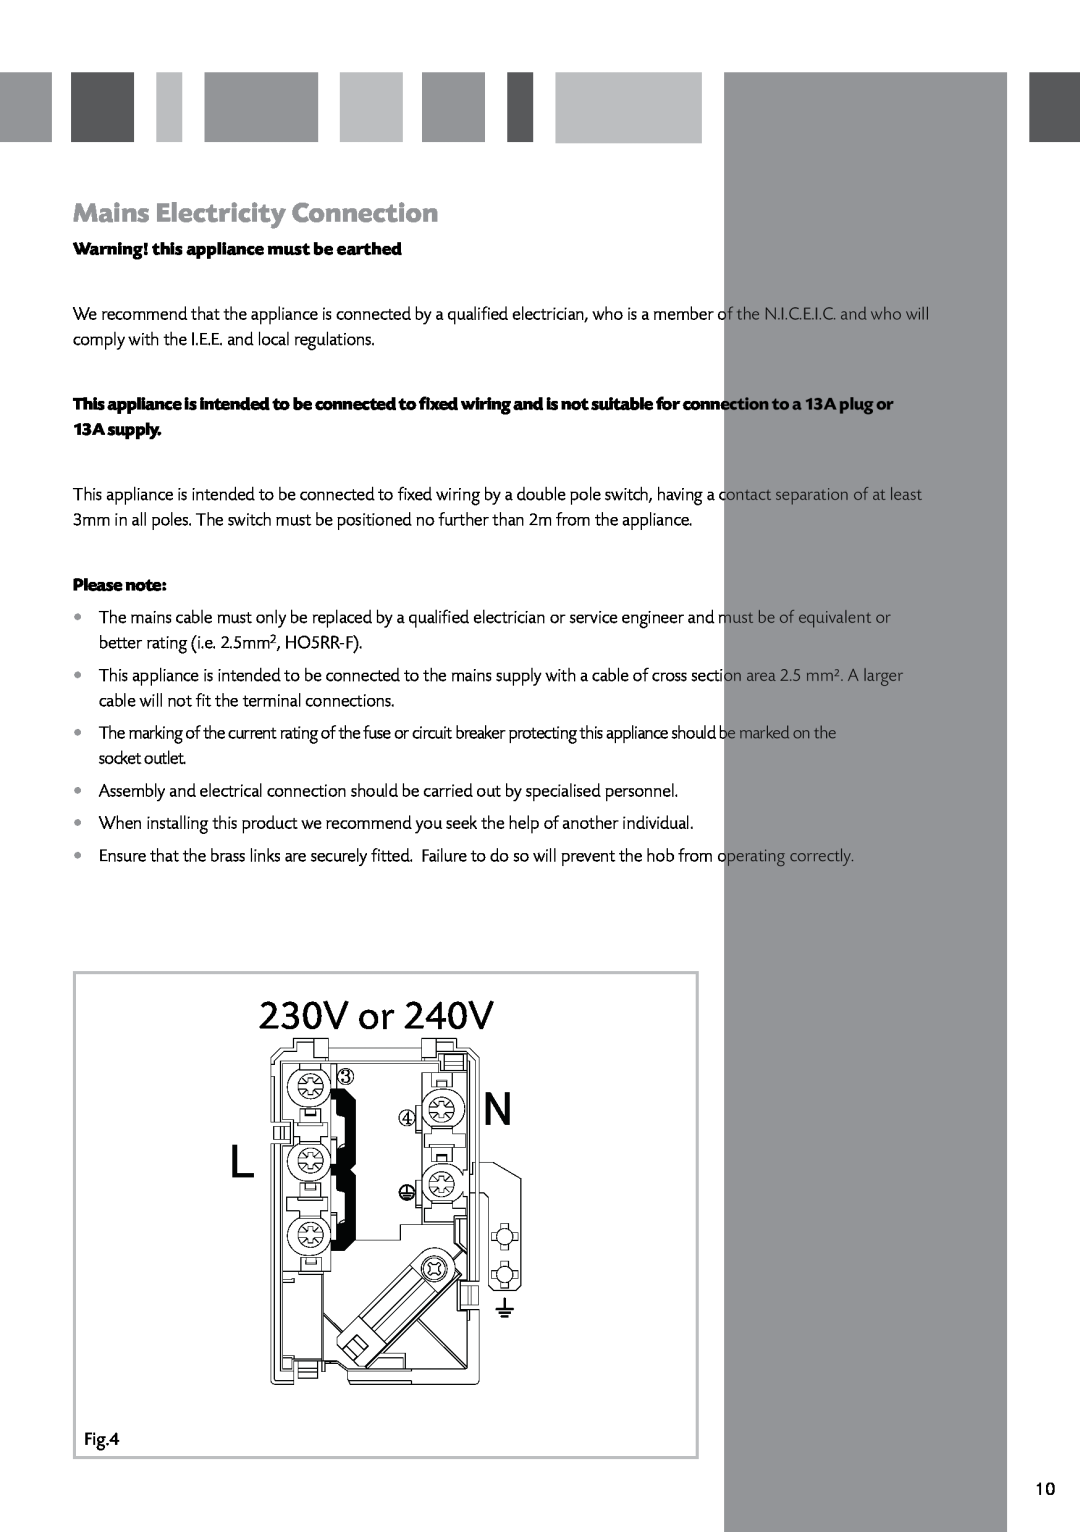 CDA HCC762 manual Mains Electricity Connection, Warning! this appliance must be earthed, 230V or, Please note 